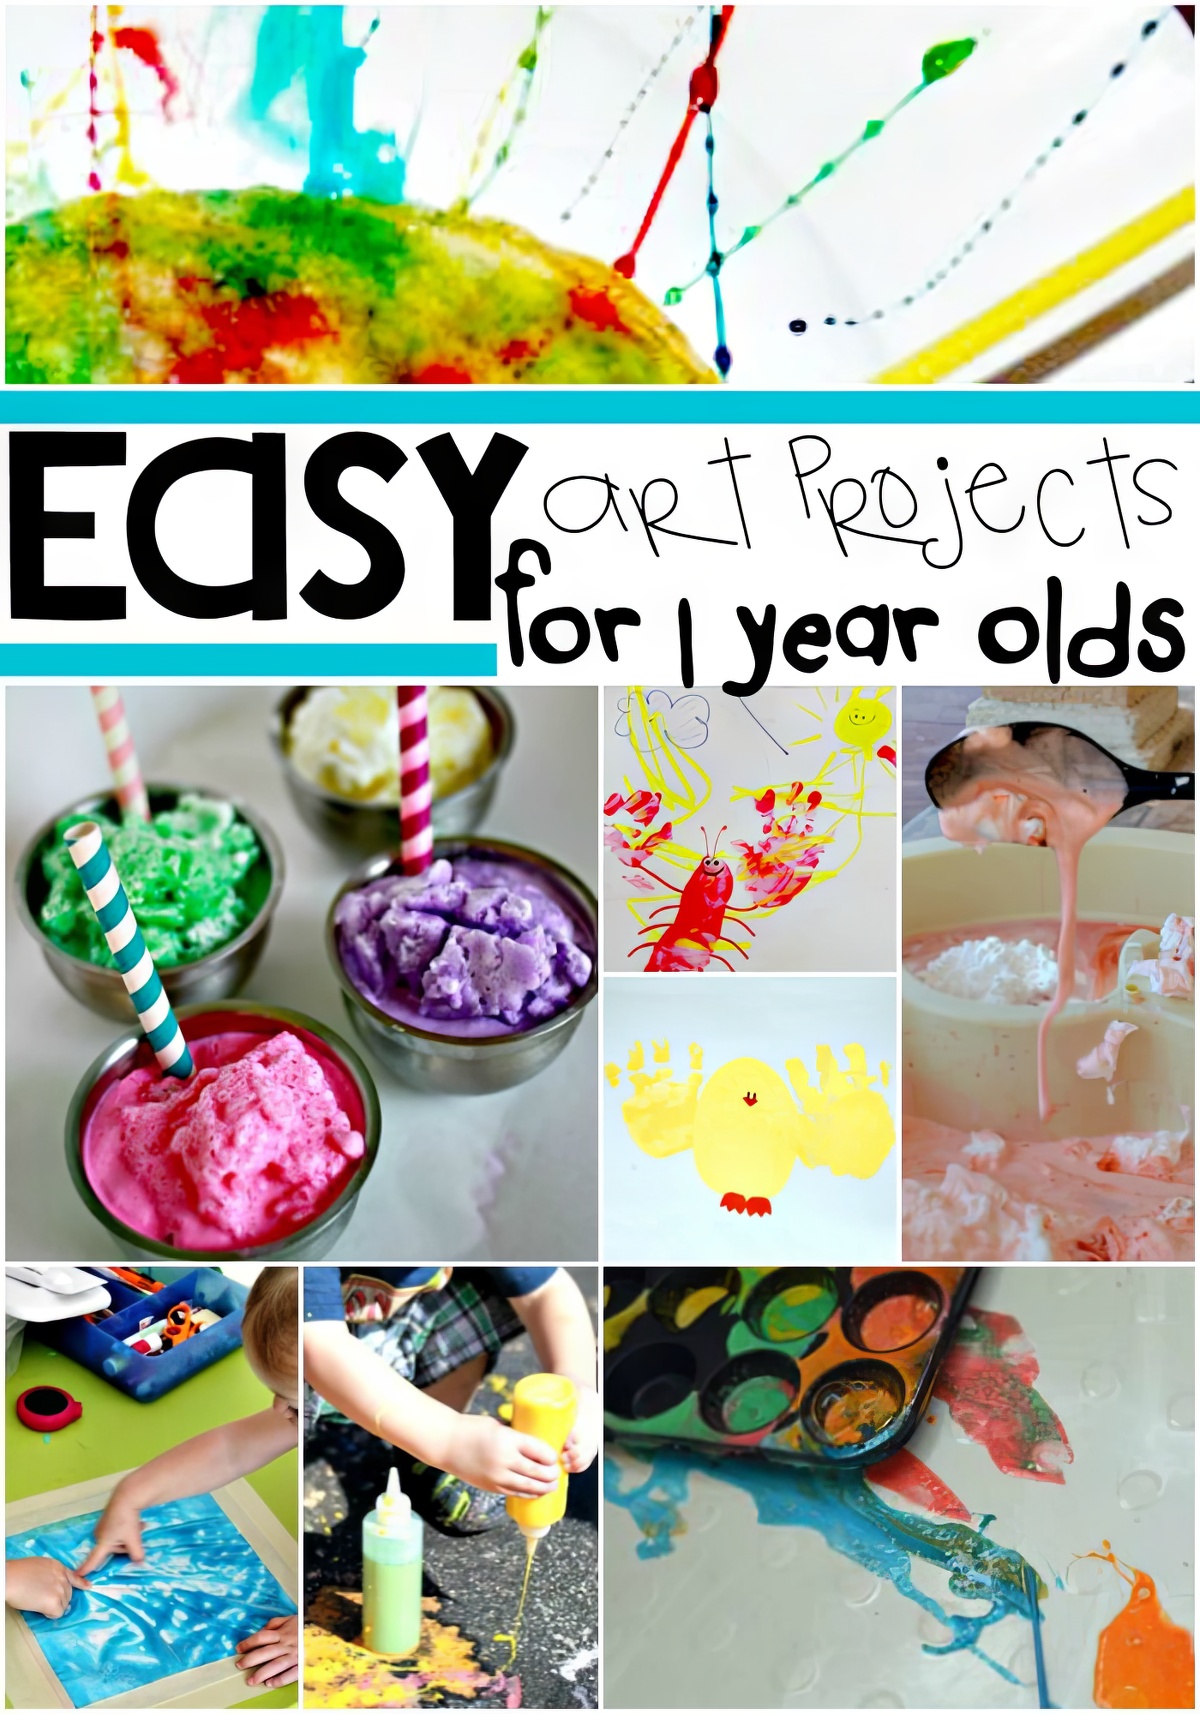 16 Easy Art Projects For Your 1-Year Old – Page 11